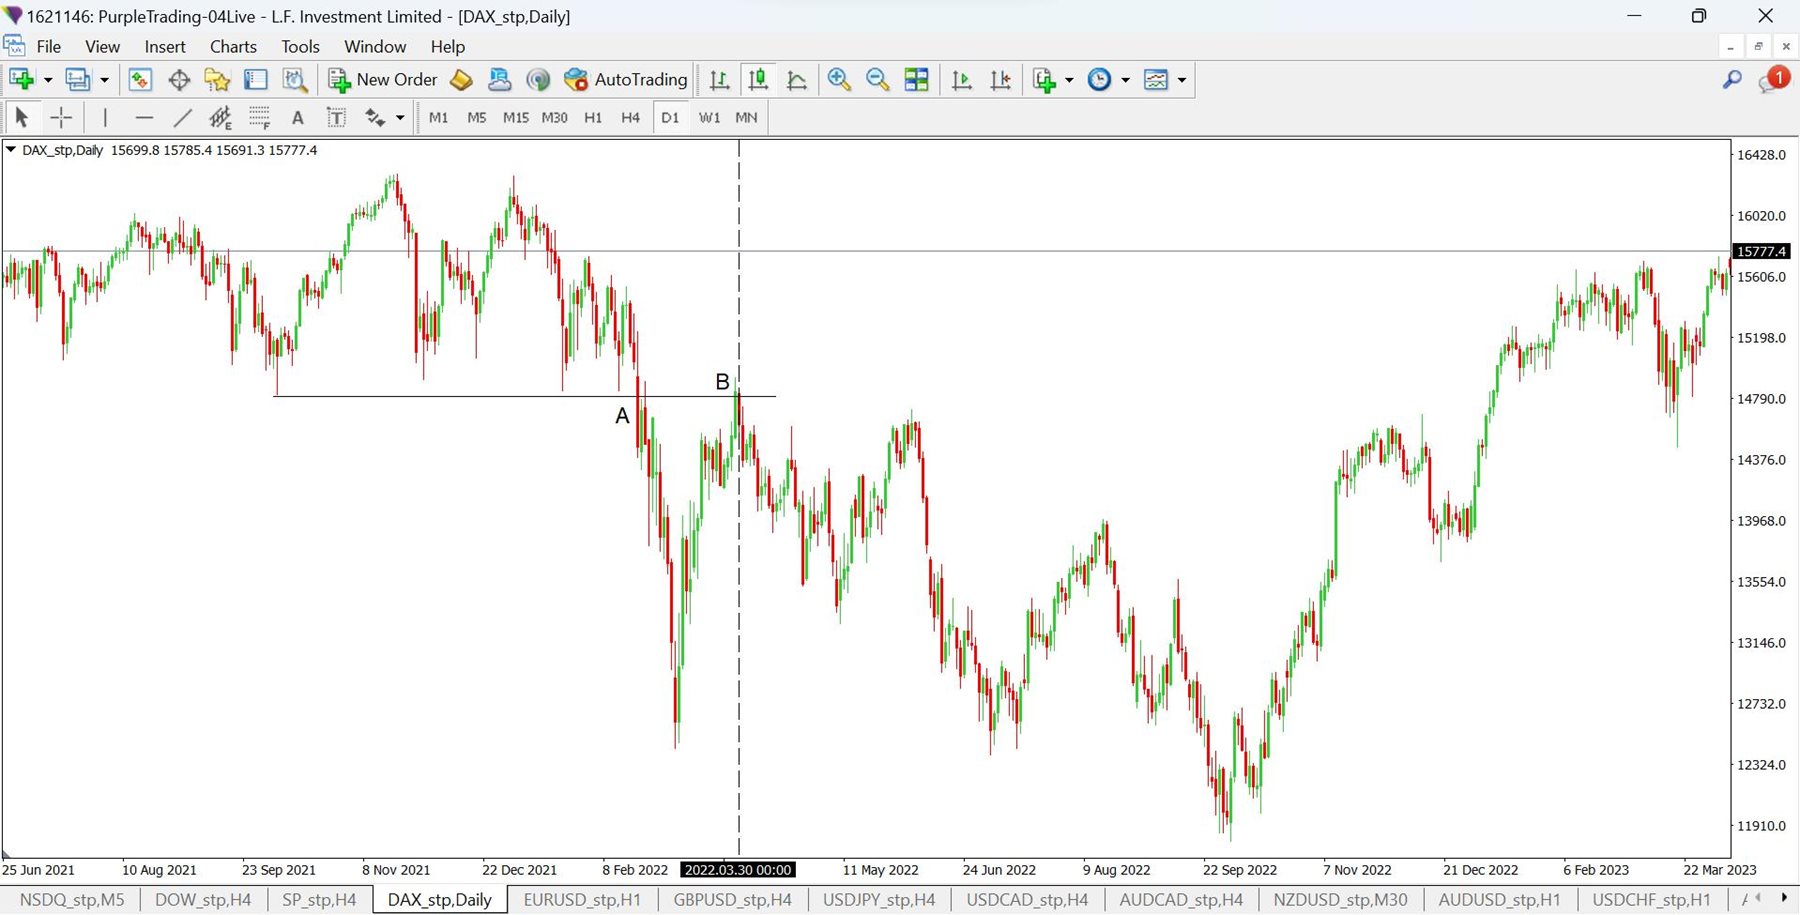 DAX index on the daily time frame